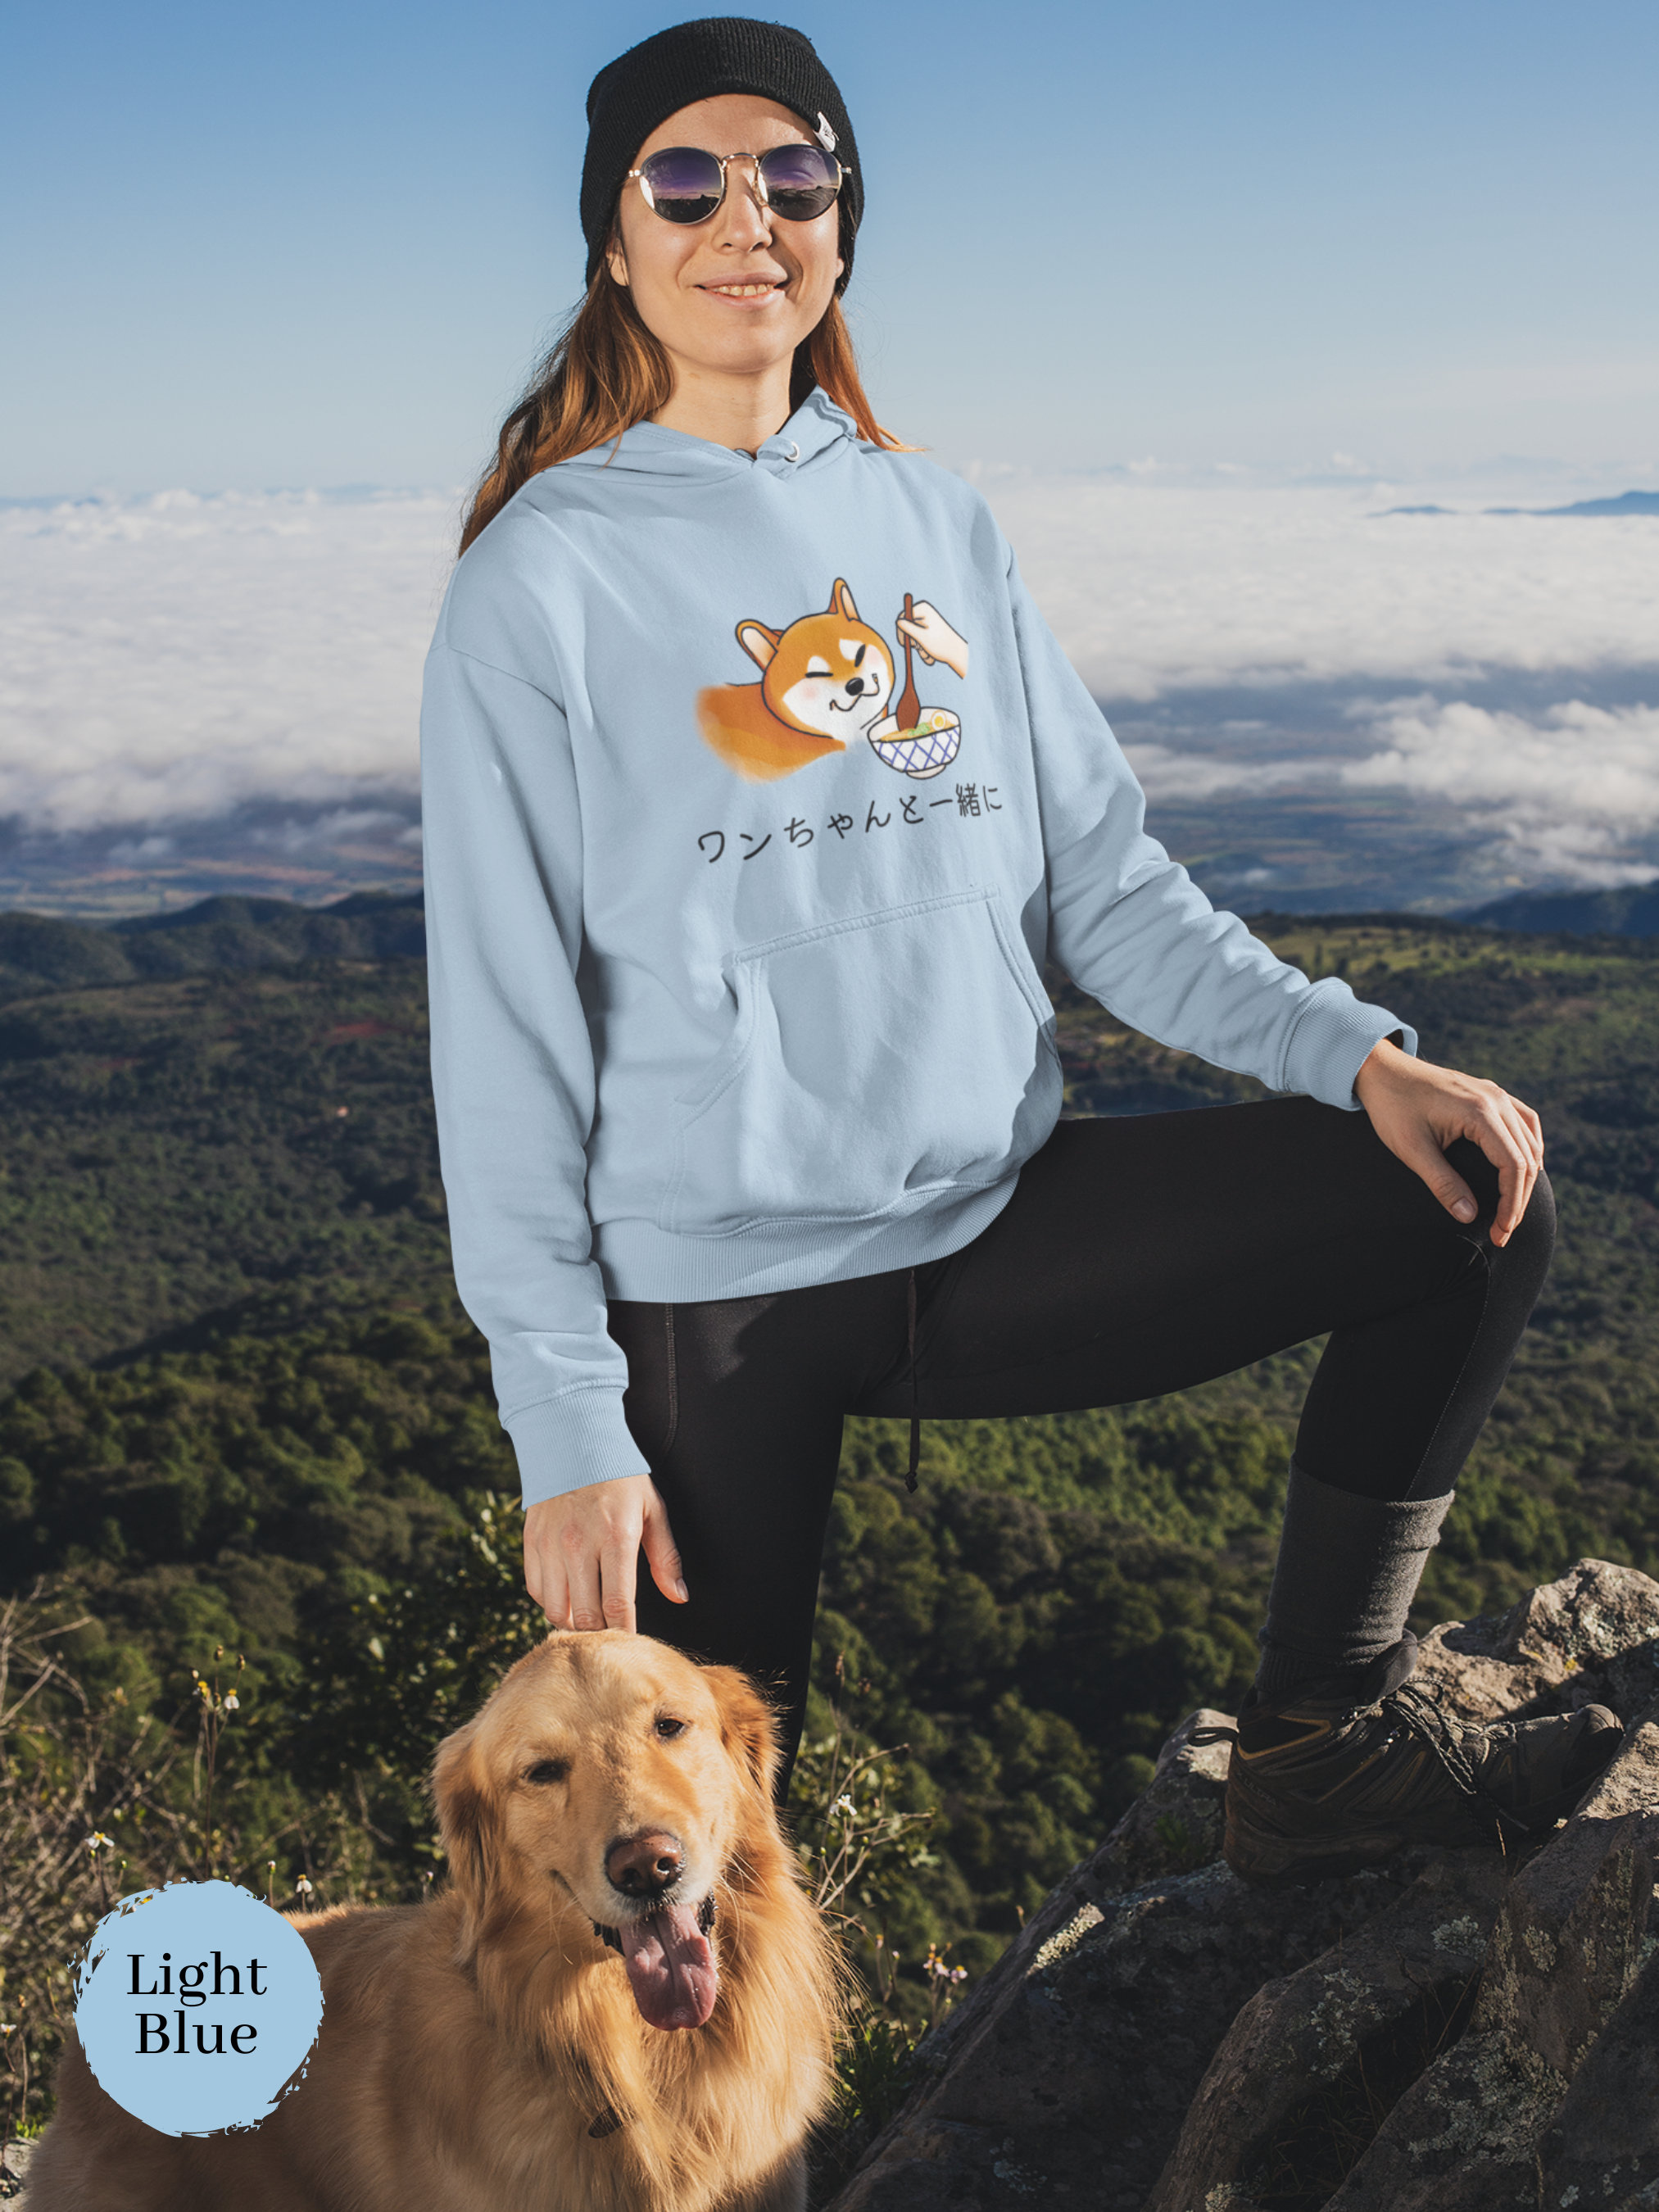 Ramen Hoodie: Shiba Inu and Noodles - Cute and Cozy Asian Foodie Sweatshirt for Ramen Lovers and Dog Owners with Fun Pun Design